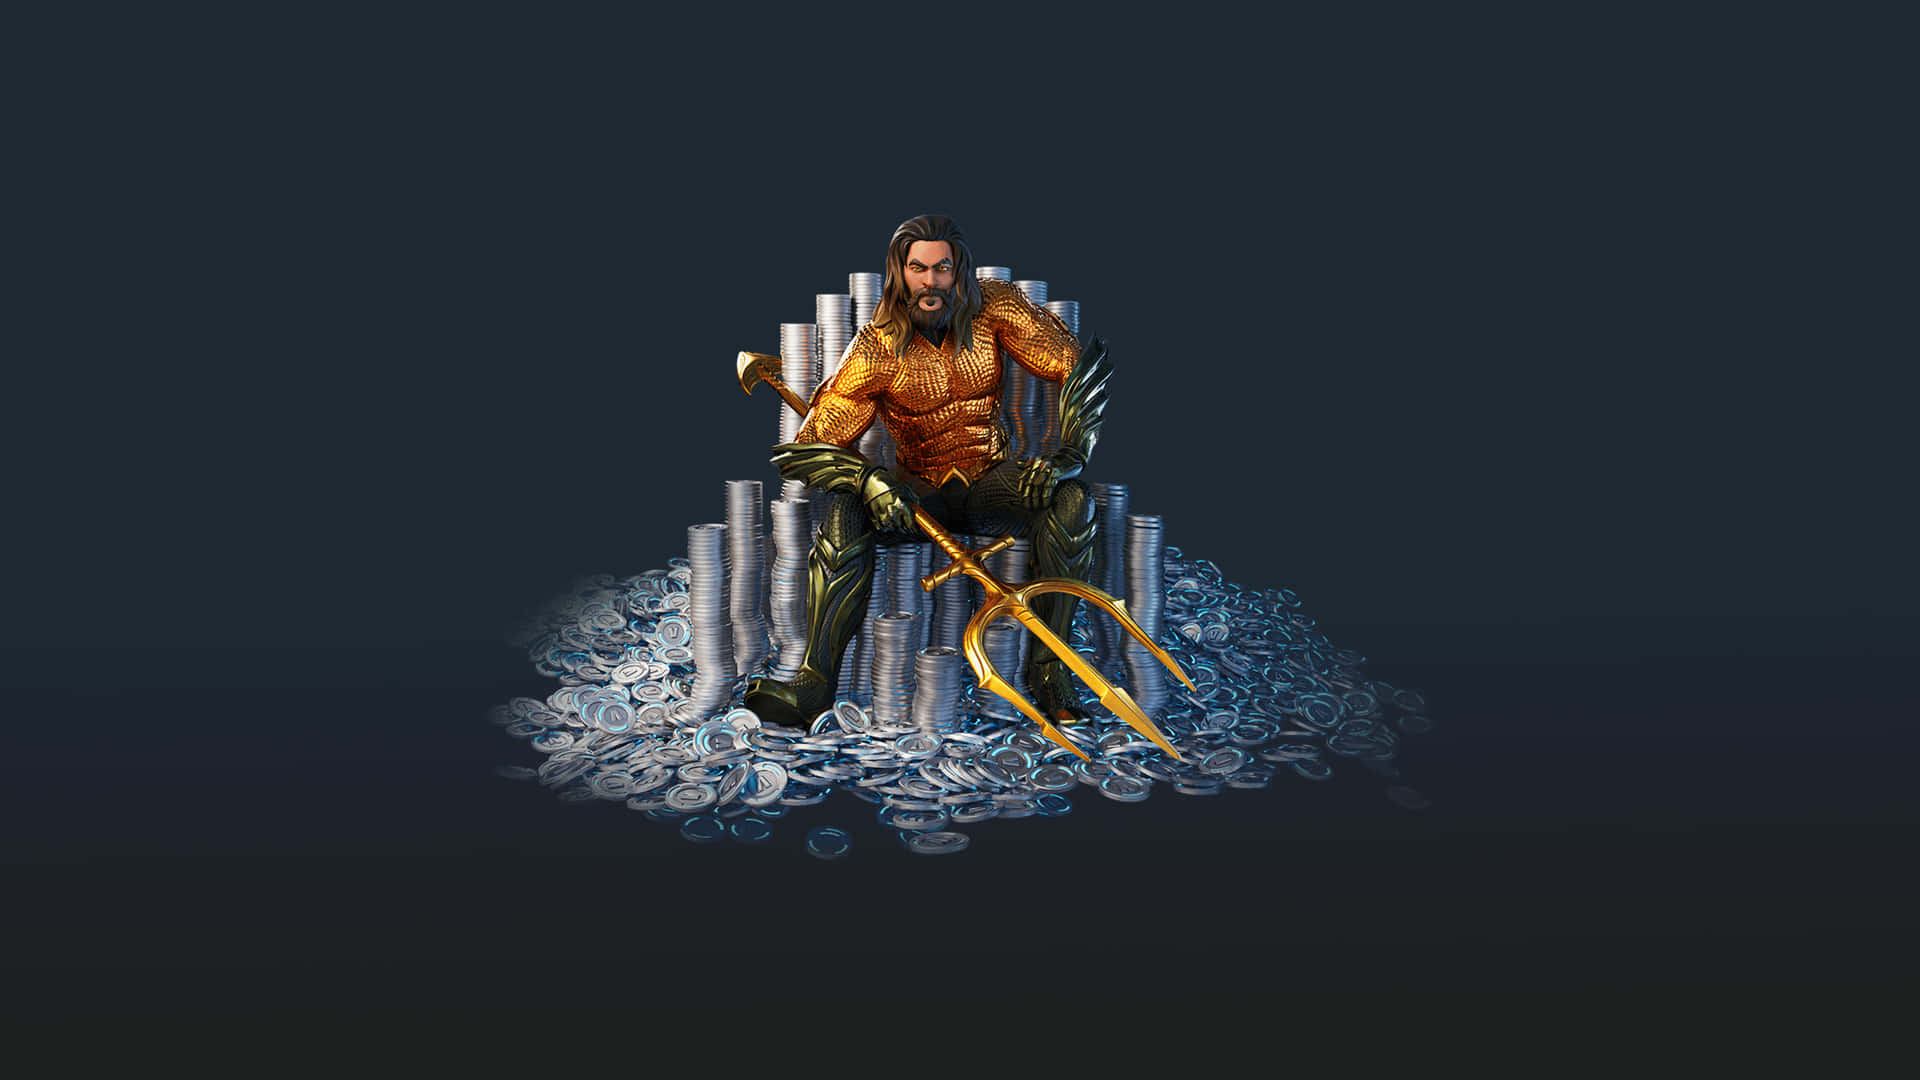 Aquaman Sitting On A Throne With Coins